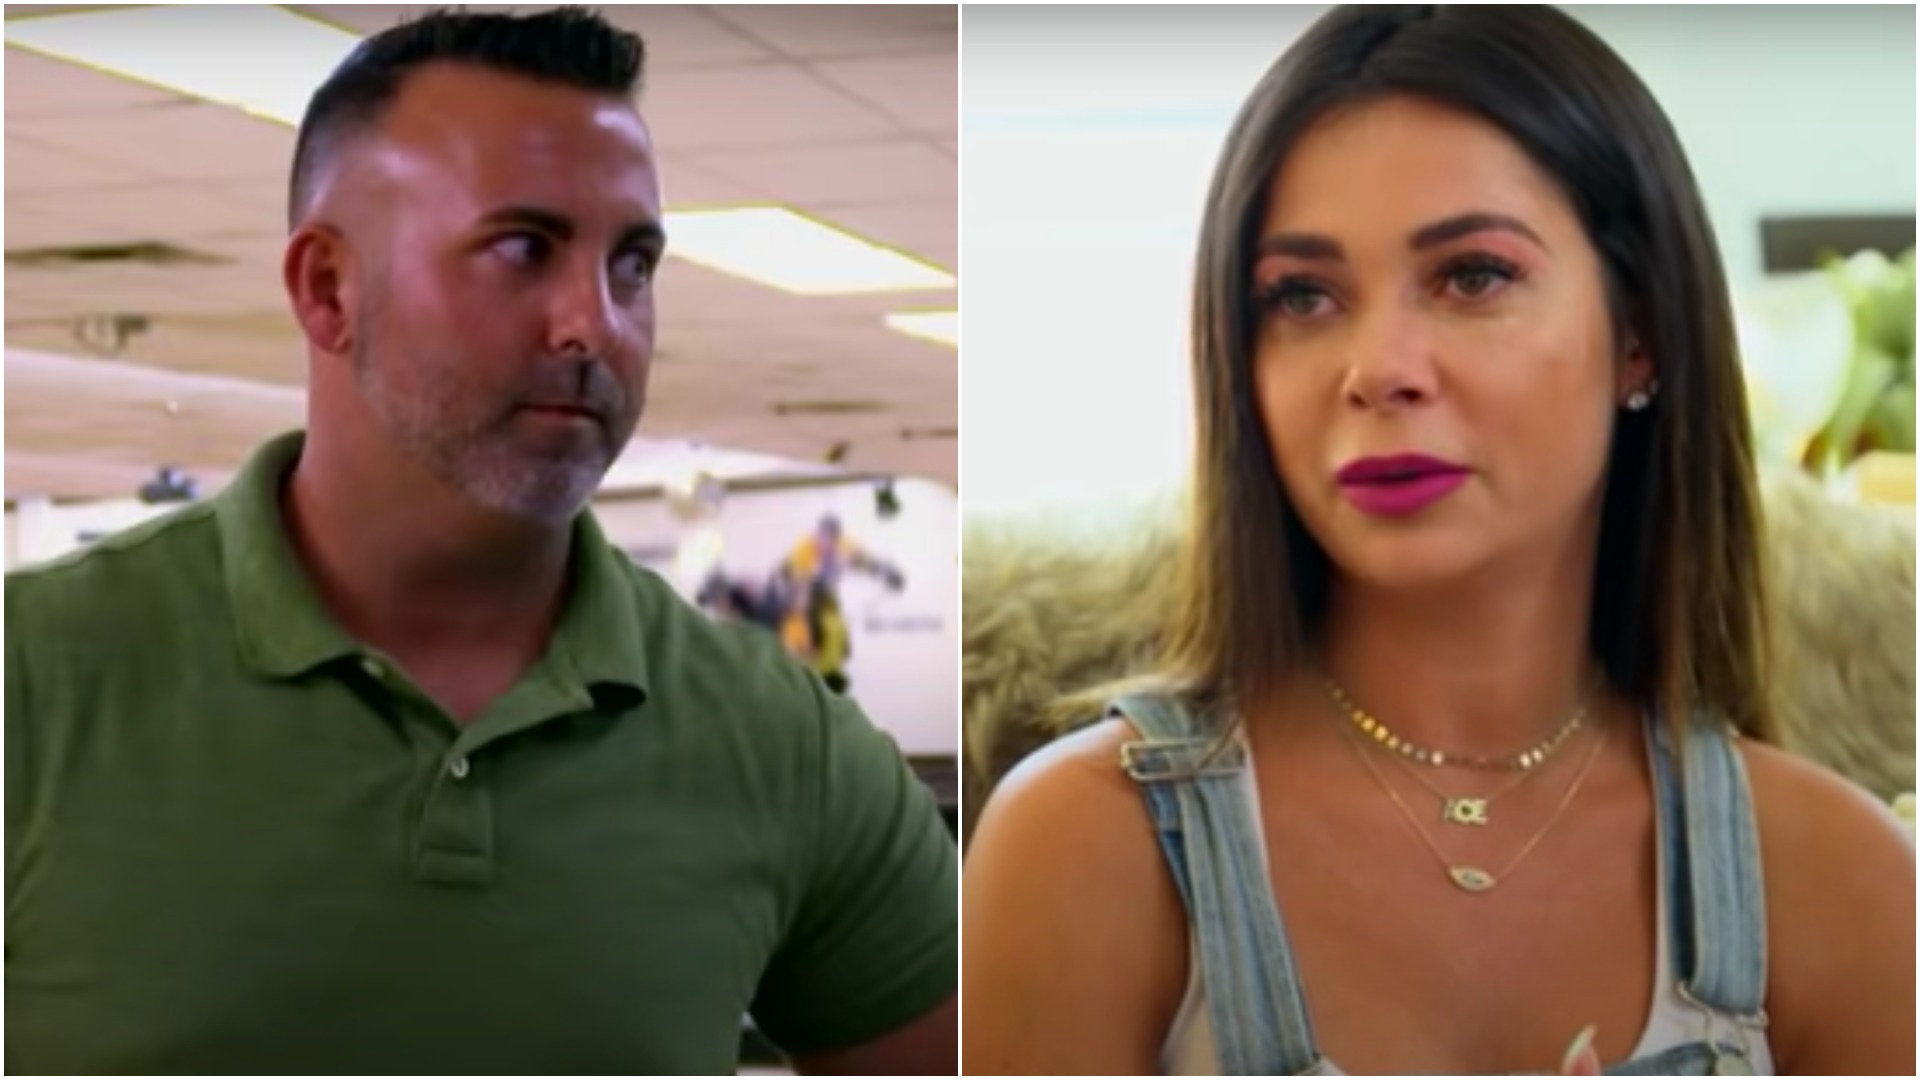 Side by side photos of Mark, wearing a green polo, and Alyssa, wearing a sleeveless top, from "Married at First Sight'